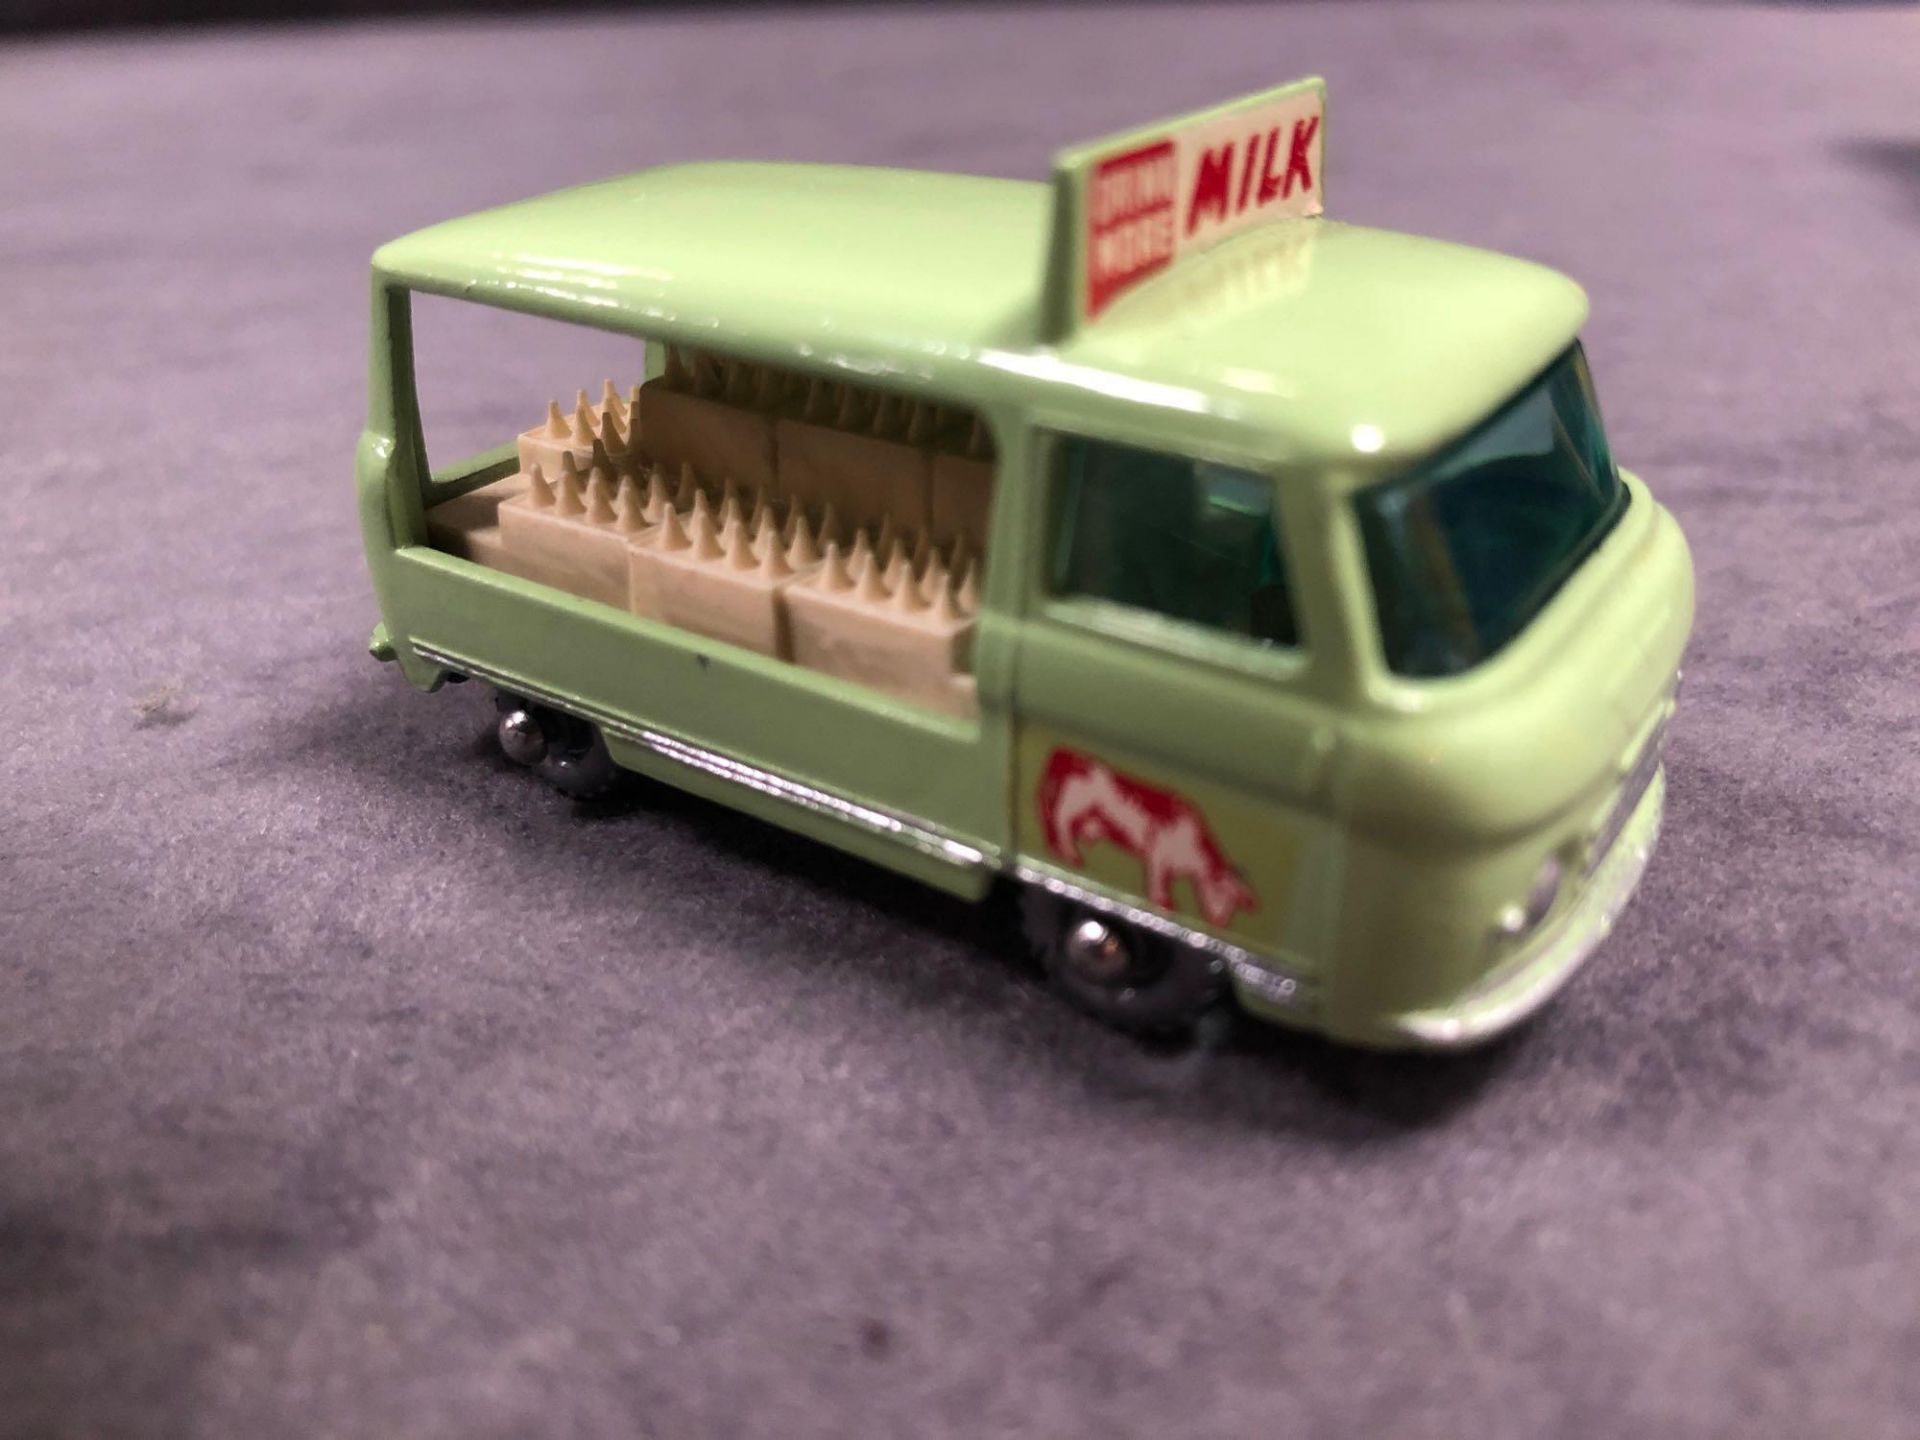 Mint Matchbox Series Lesney Diecast #21 Milk Delivery Truck With Cow On Door And Grey Plastic Wheels - Image 2 of 4